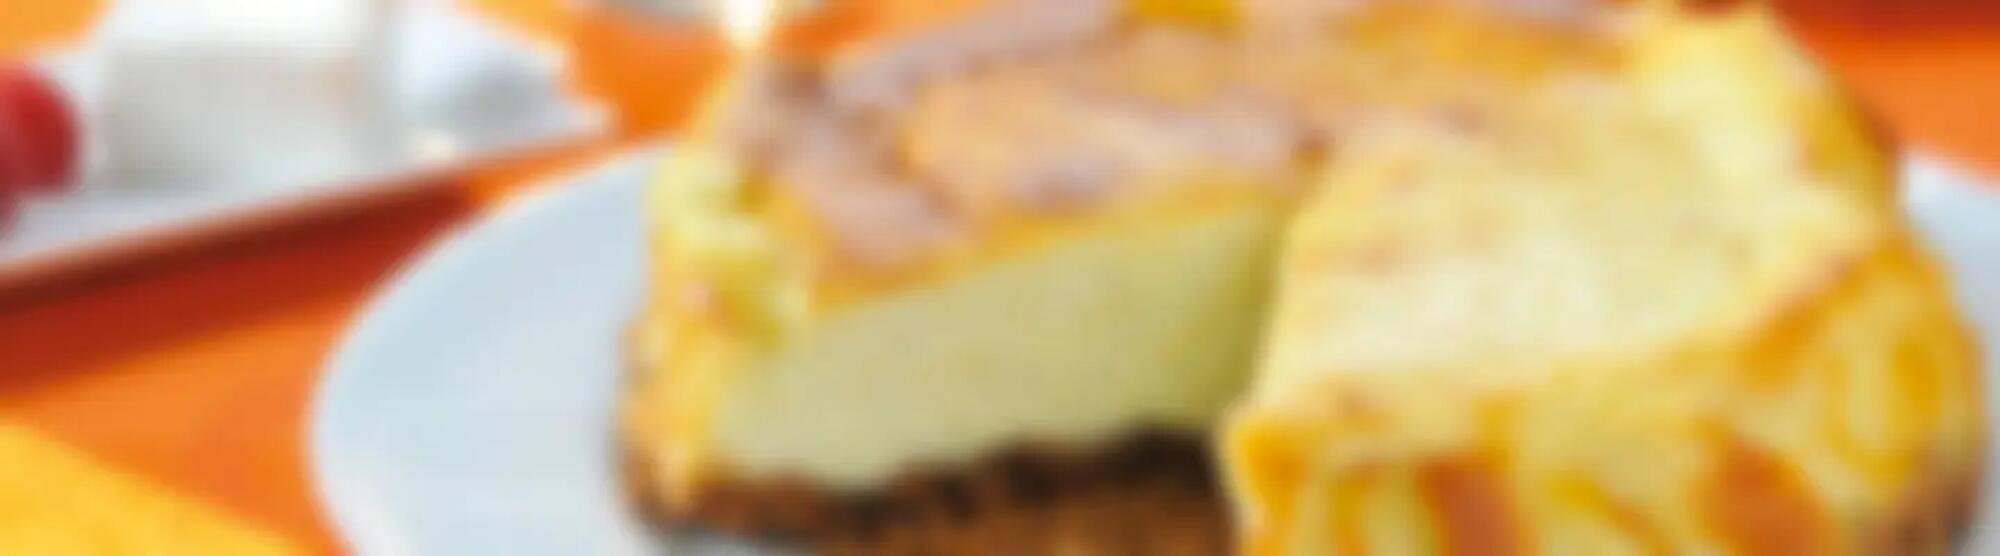 Recette : Cheesecake au fromage frais 0%